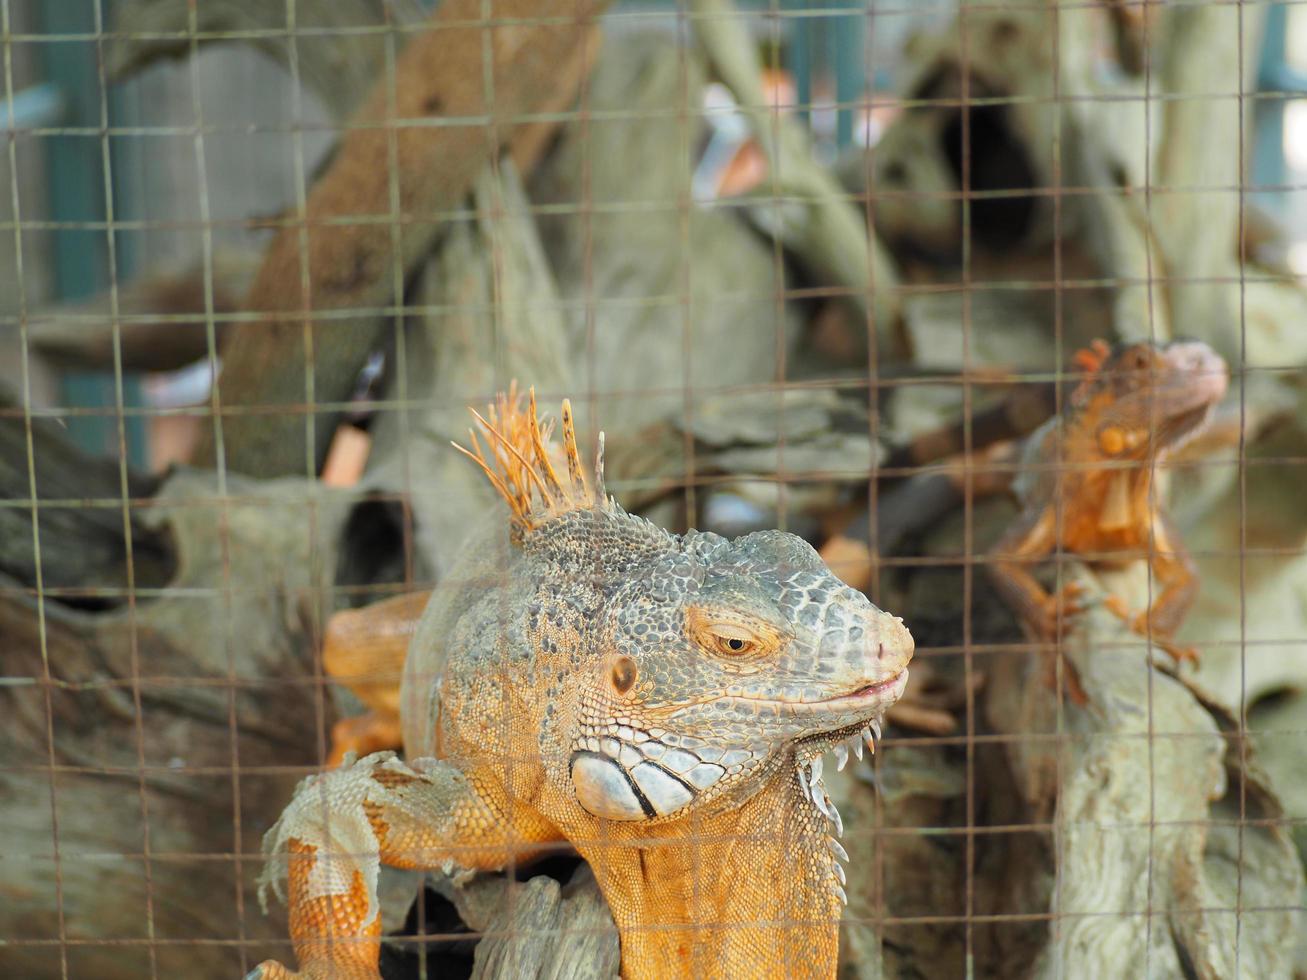 Orange iguana in a cage in the zoo photo